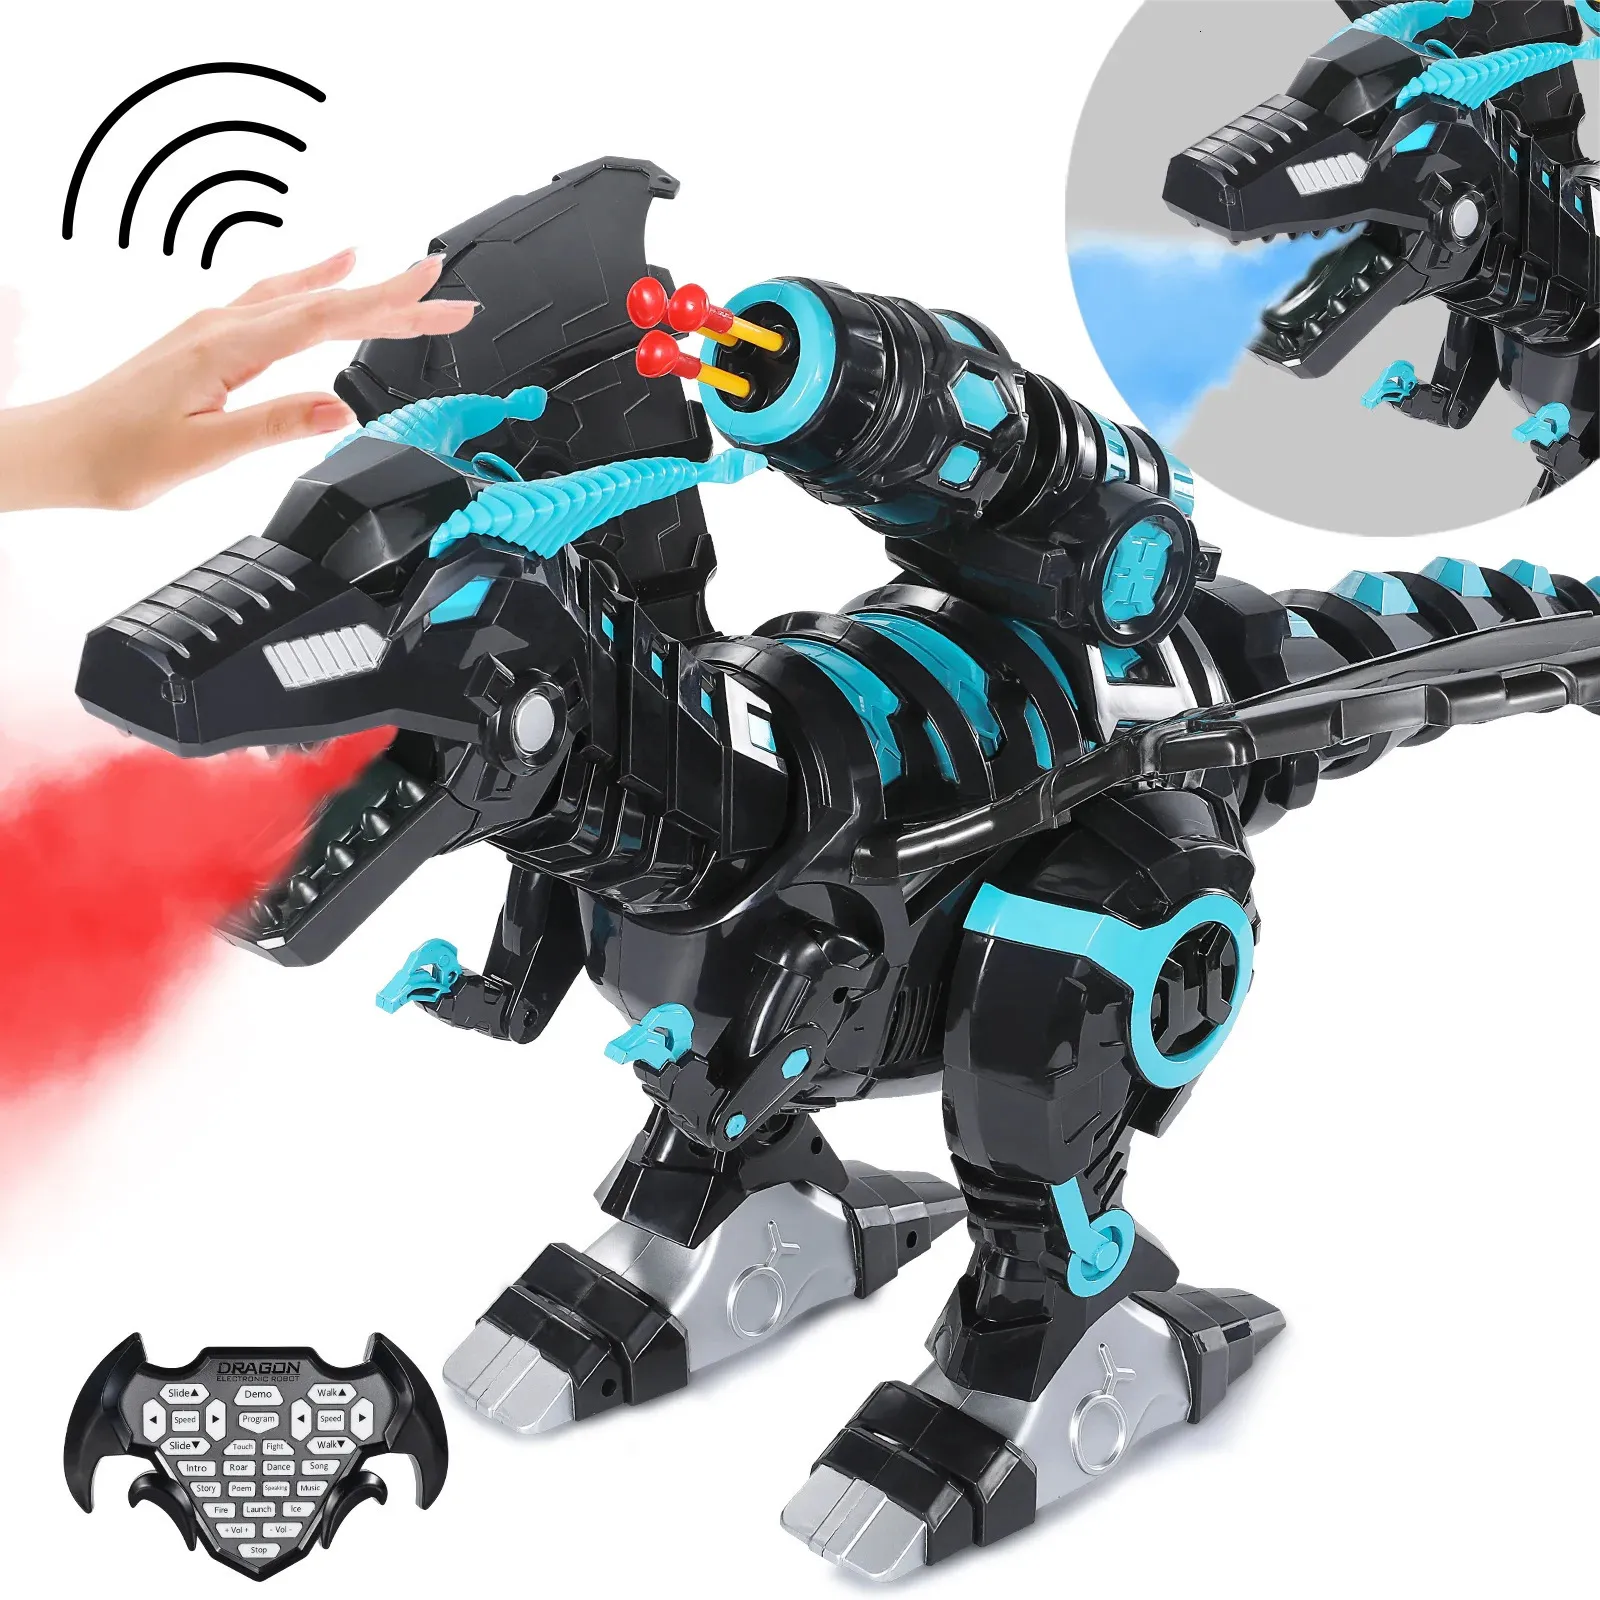 ElectricRC Animals Mist Spray Remote Control Dinosaurs Toys Electric Dinosaur RC Robot Animals Educational Toys for Children Boys Gifts 231115